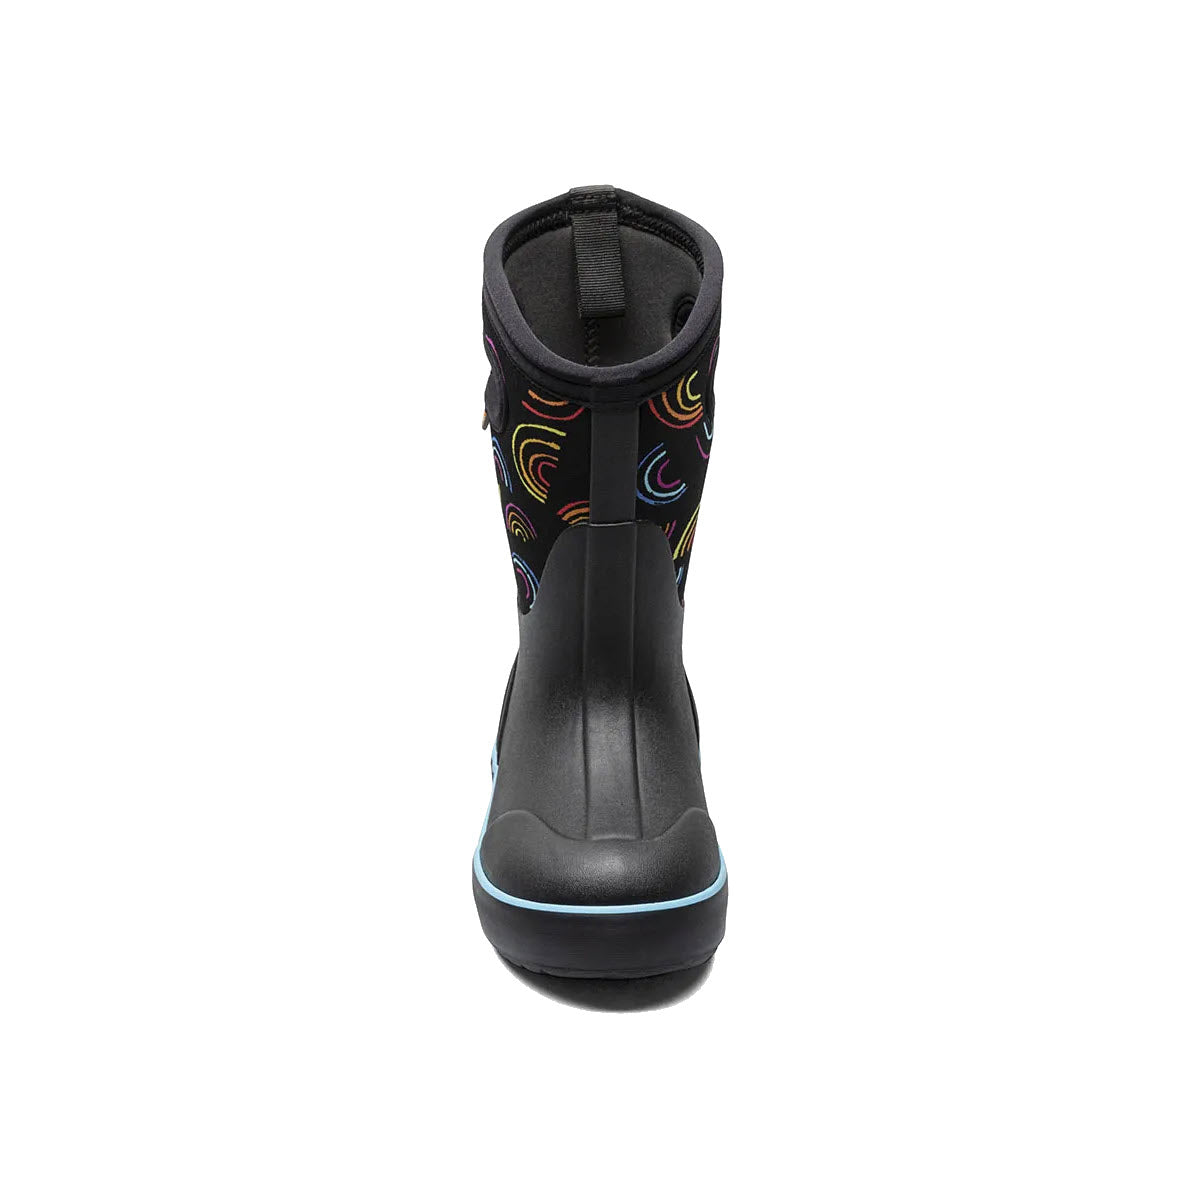 Sentence with replaced product: Bogs Classic II Wild Rainbows Black Mult winter boot with colorful abstract patterns on the sides, designed for better traction, viewed from the back against a white background.